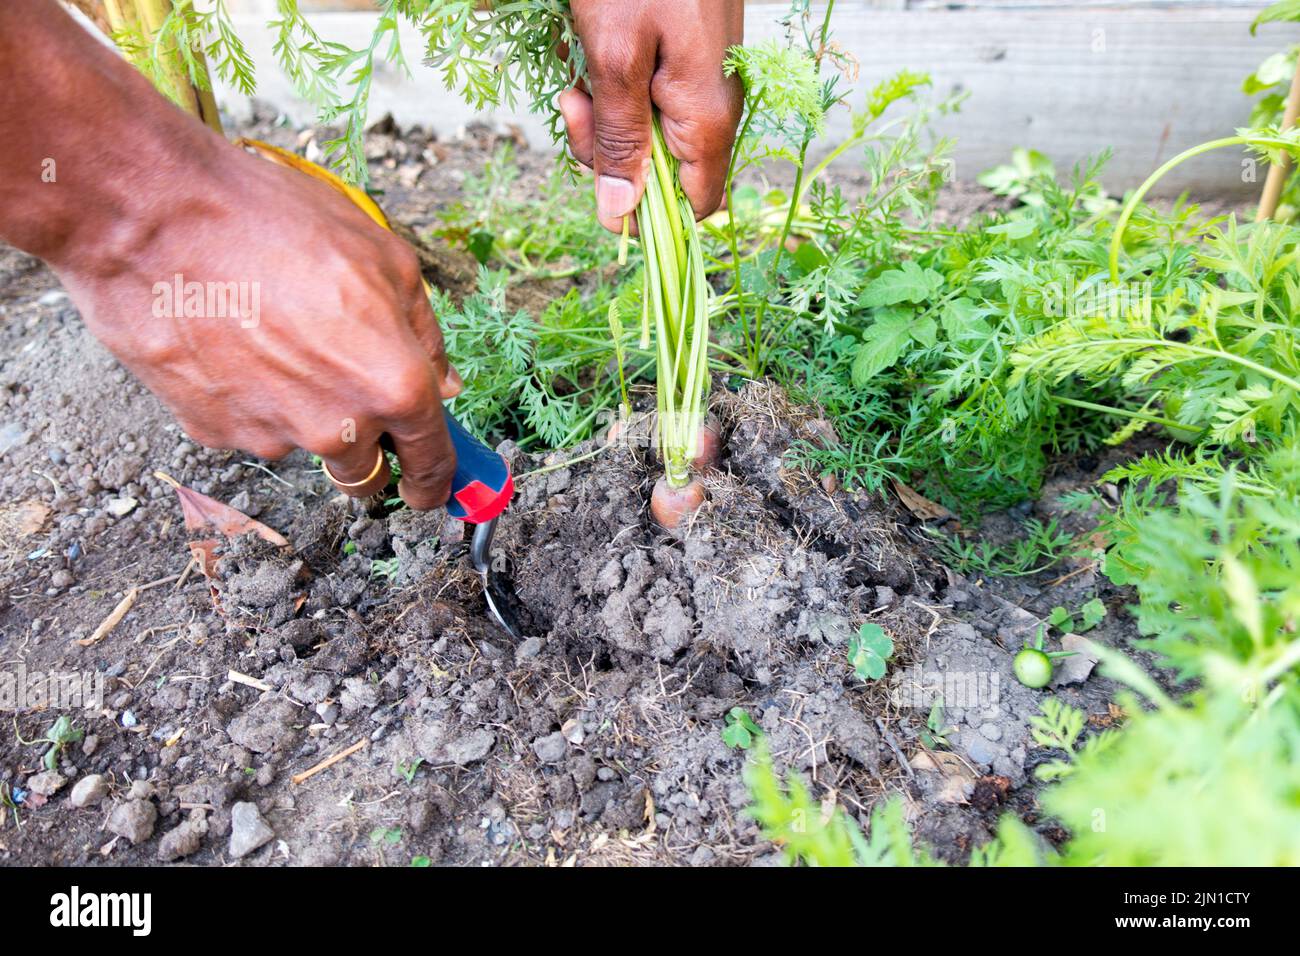 Adult male digging Carrot in home garden using a hand fork Stock Photo